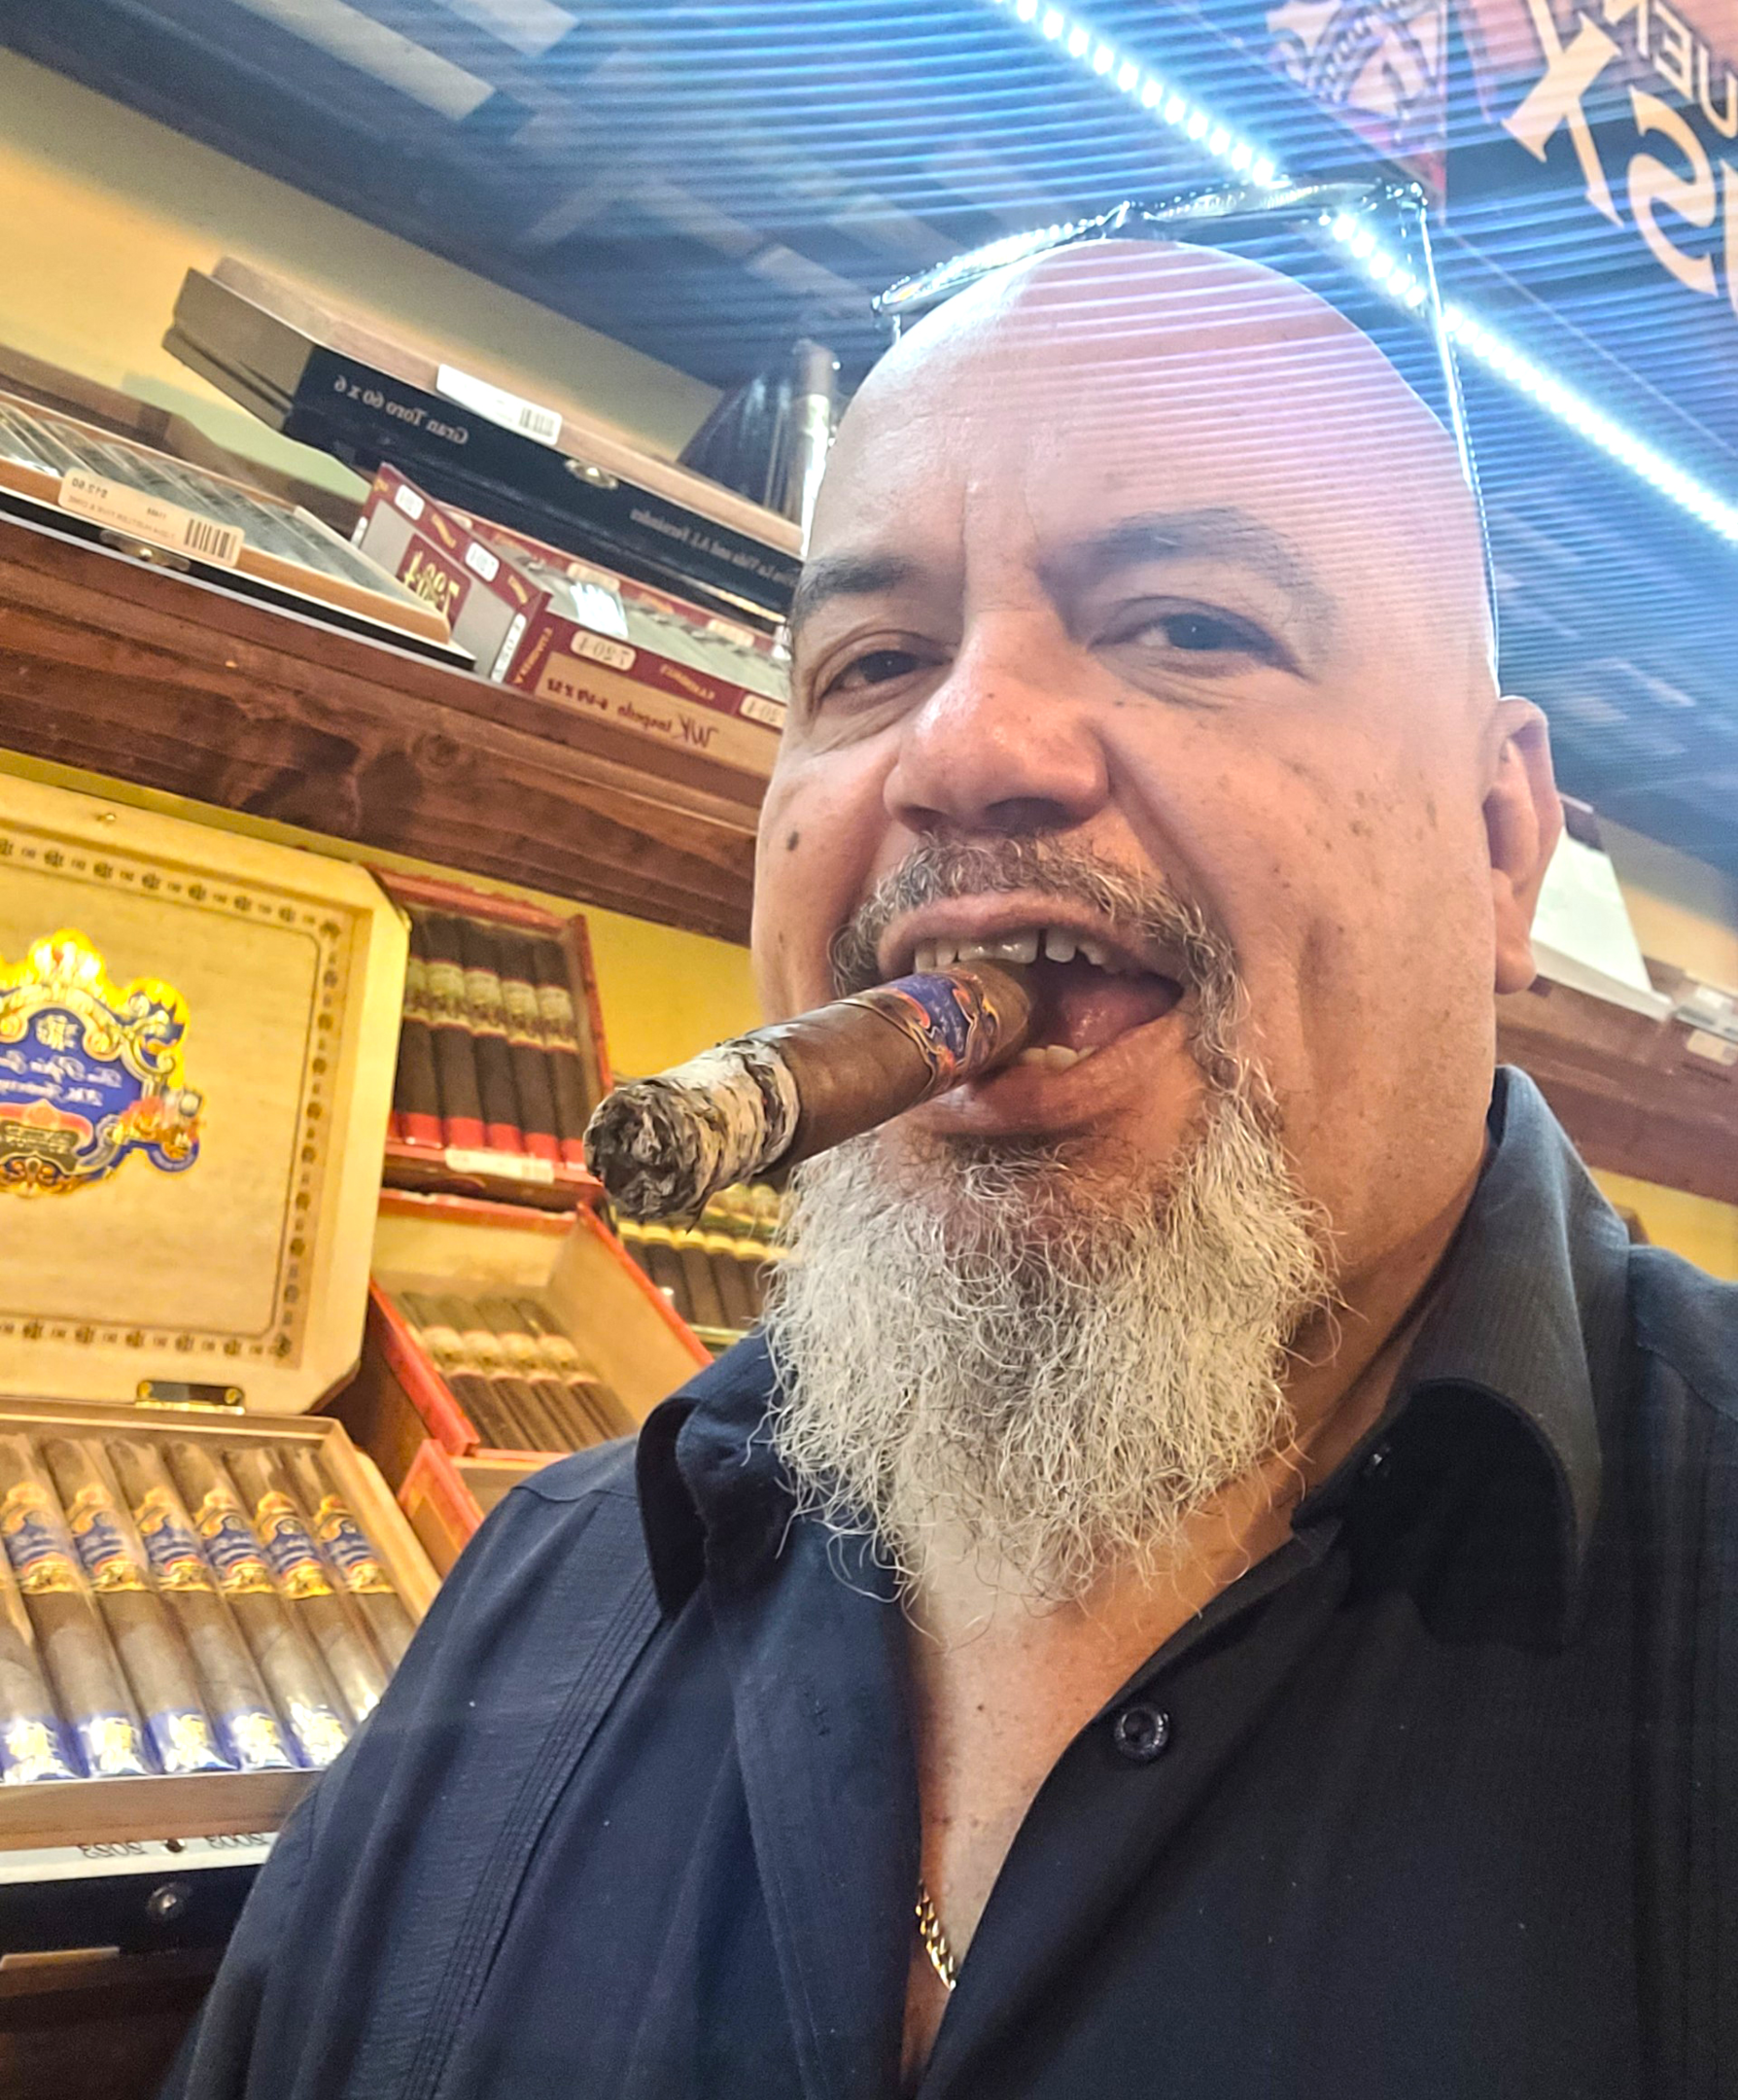 A photo of a satisfied customer holding the Don Pepín García 20th Anniversary Limited Edition cigar with a big smile on his face.